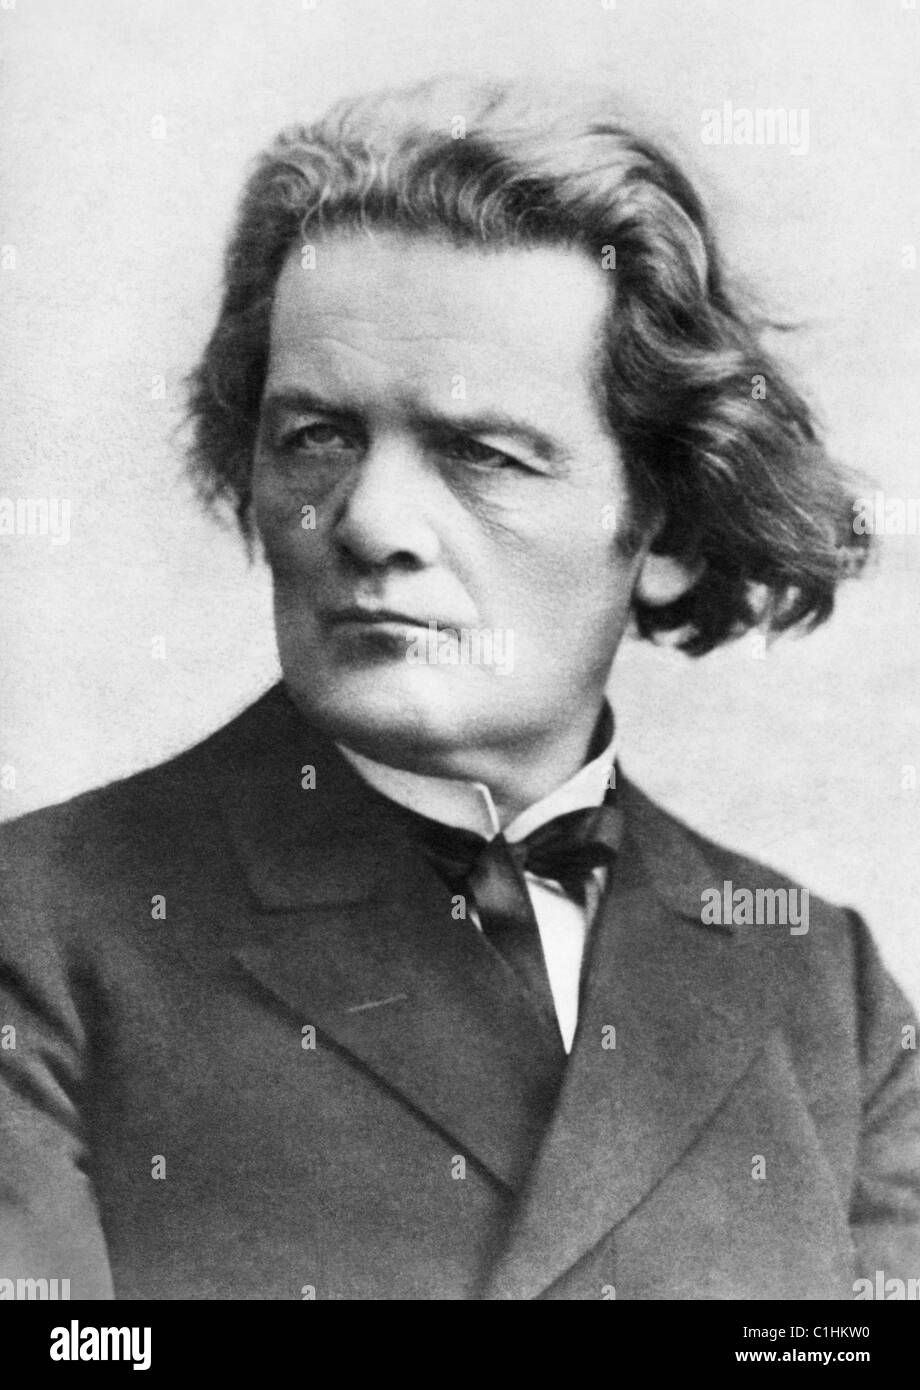 Vintage portrait photo of Russian pianist, composer and conductor Anton Rubinstein (1829 – 1894). Photo circa 1890. Stock Photo